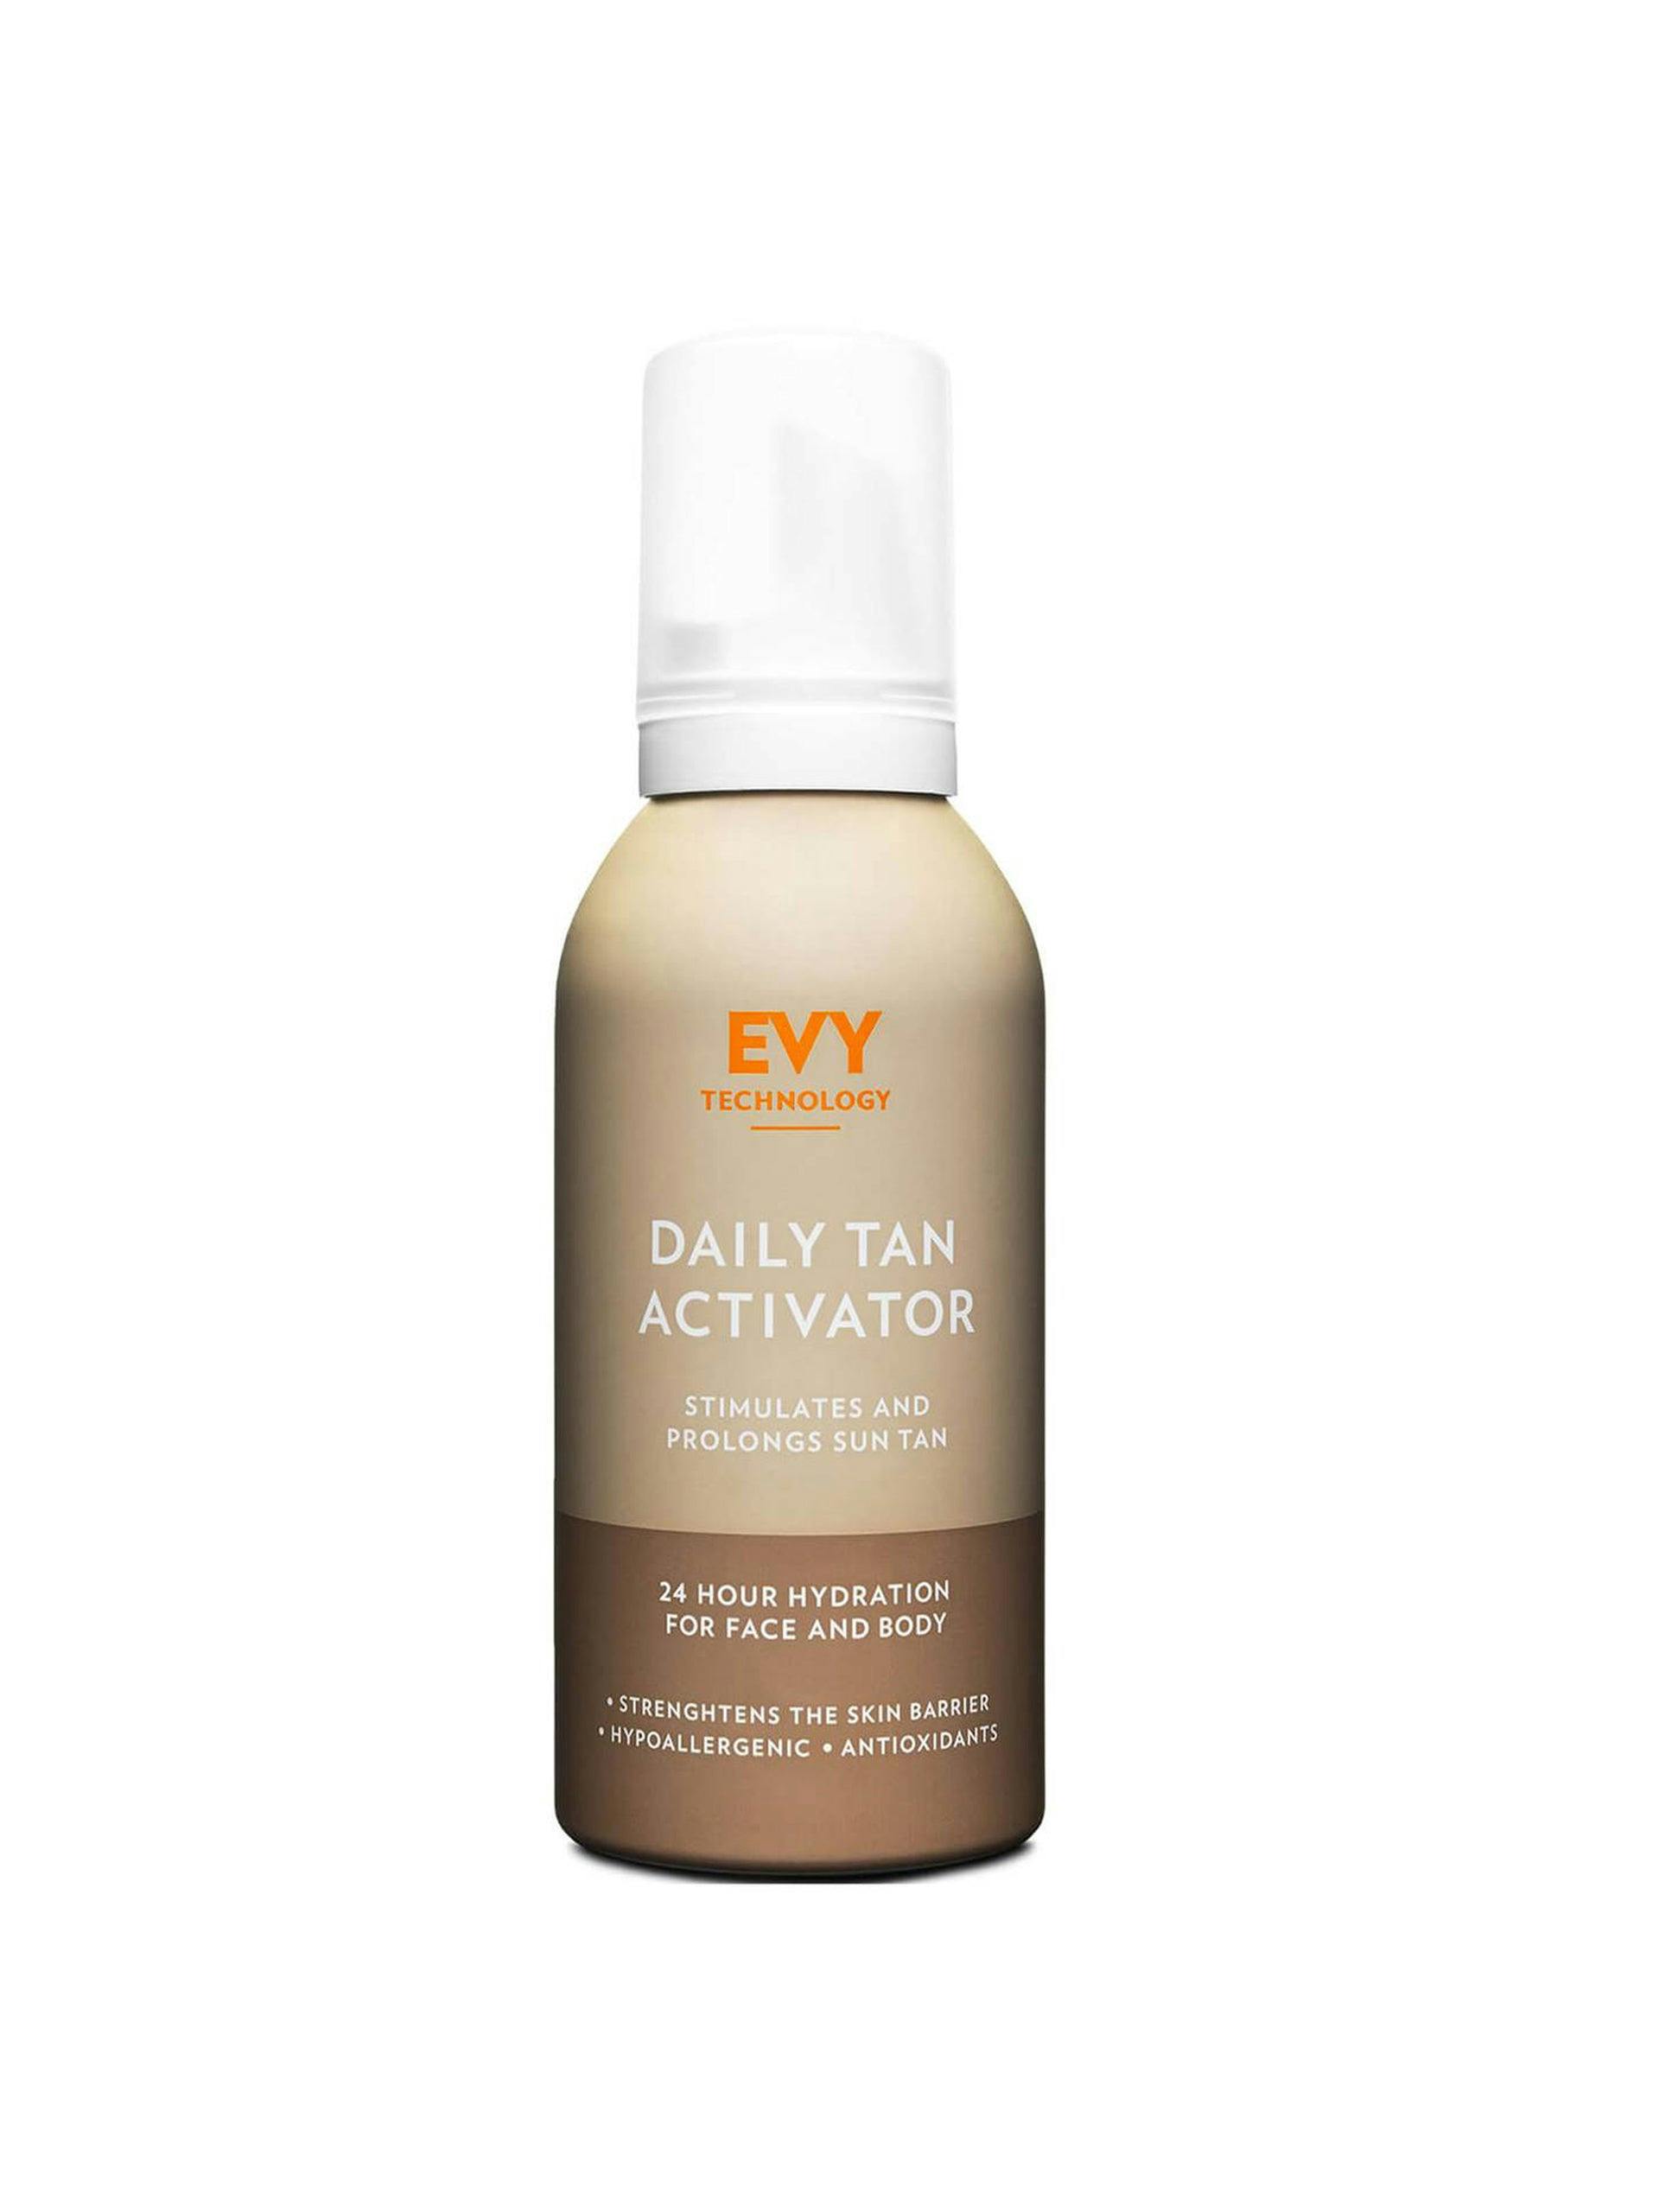 Daily tan activator